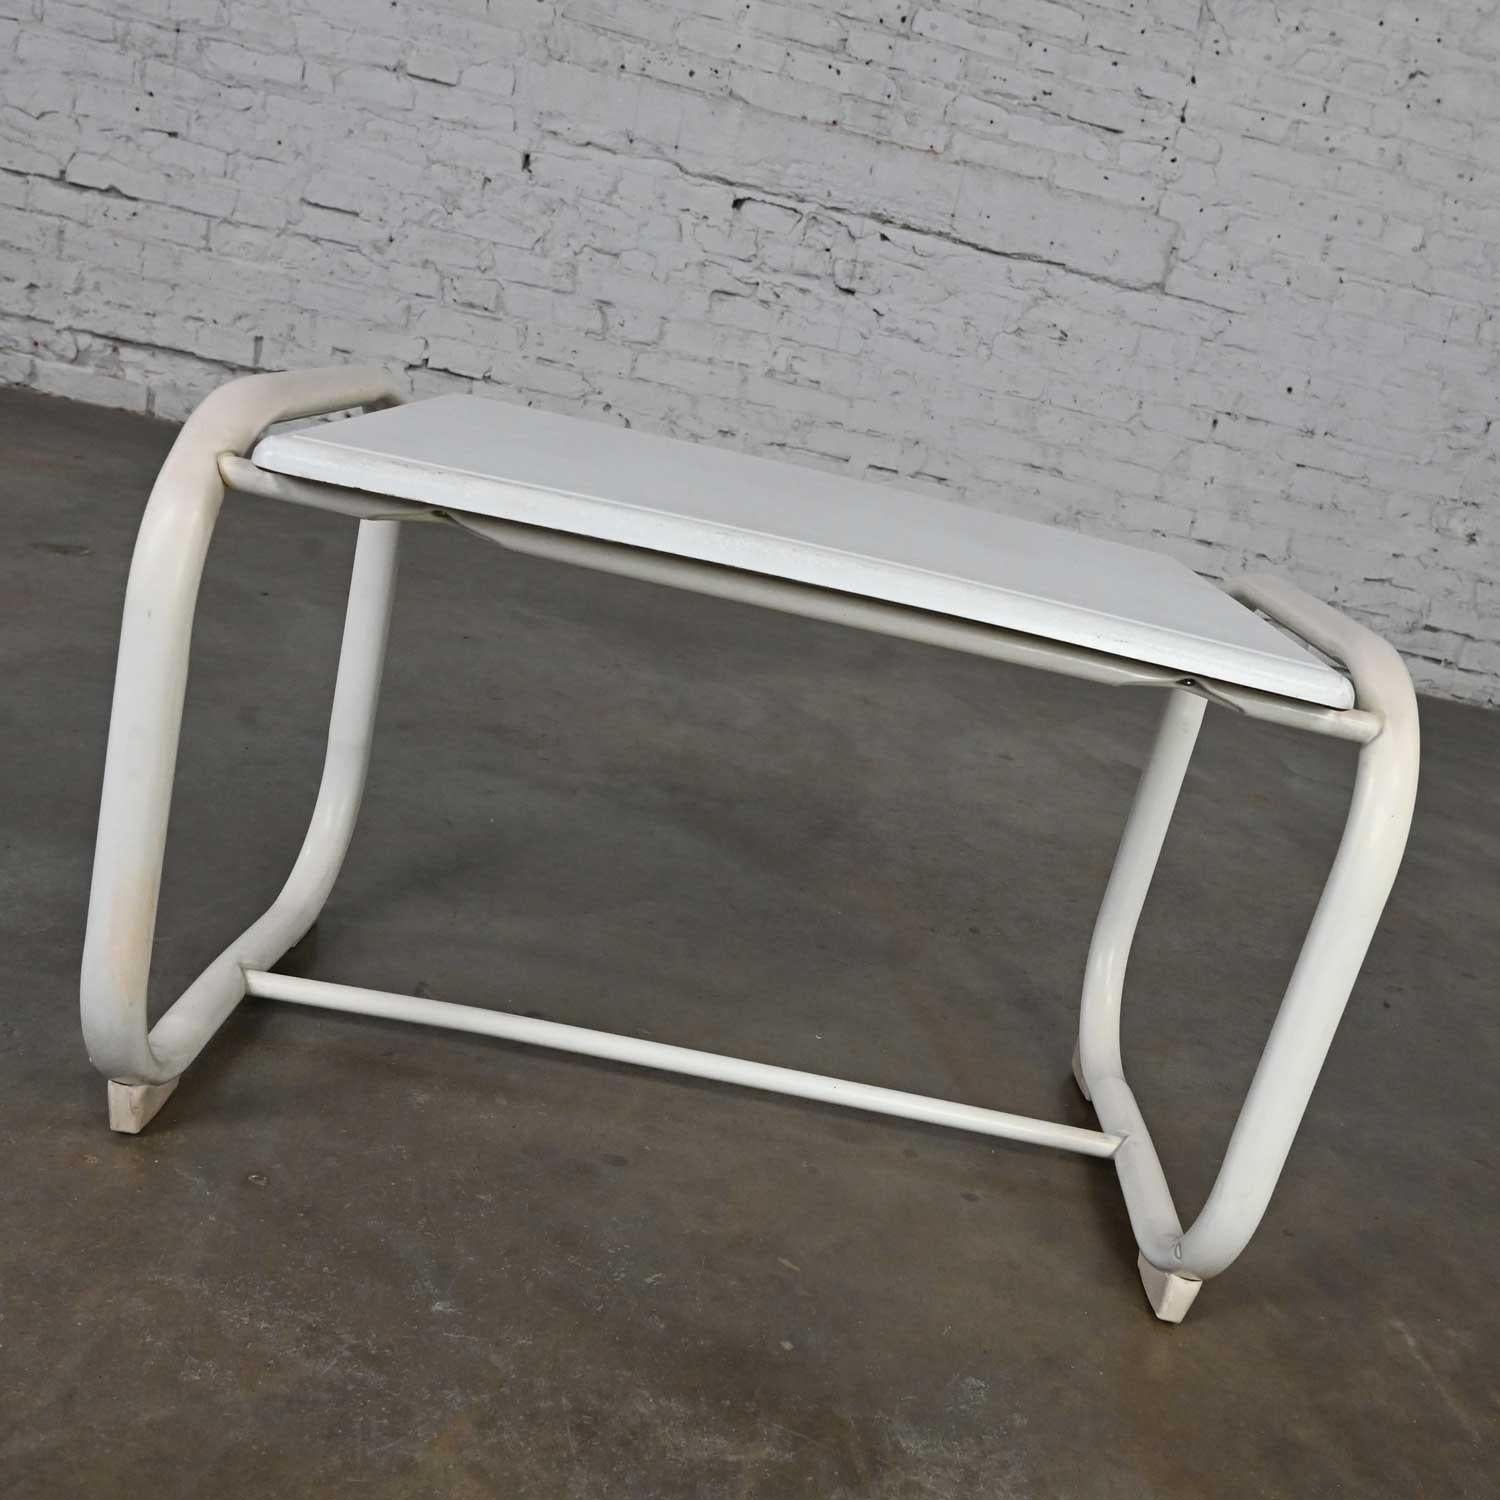 Wonderful vintage MCM (Mid-Century Modern) Samsonite outdoor accent table with white flattened steel tube base and Werzalit top. Beautiful condition, keeping in mind that this is vintage and not new so will have signs of use and wear. The top has a